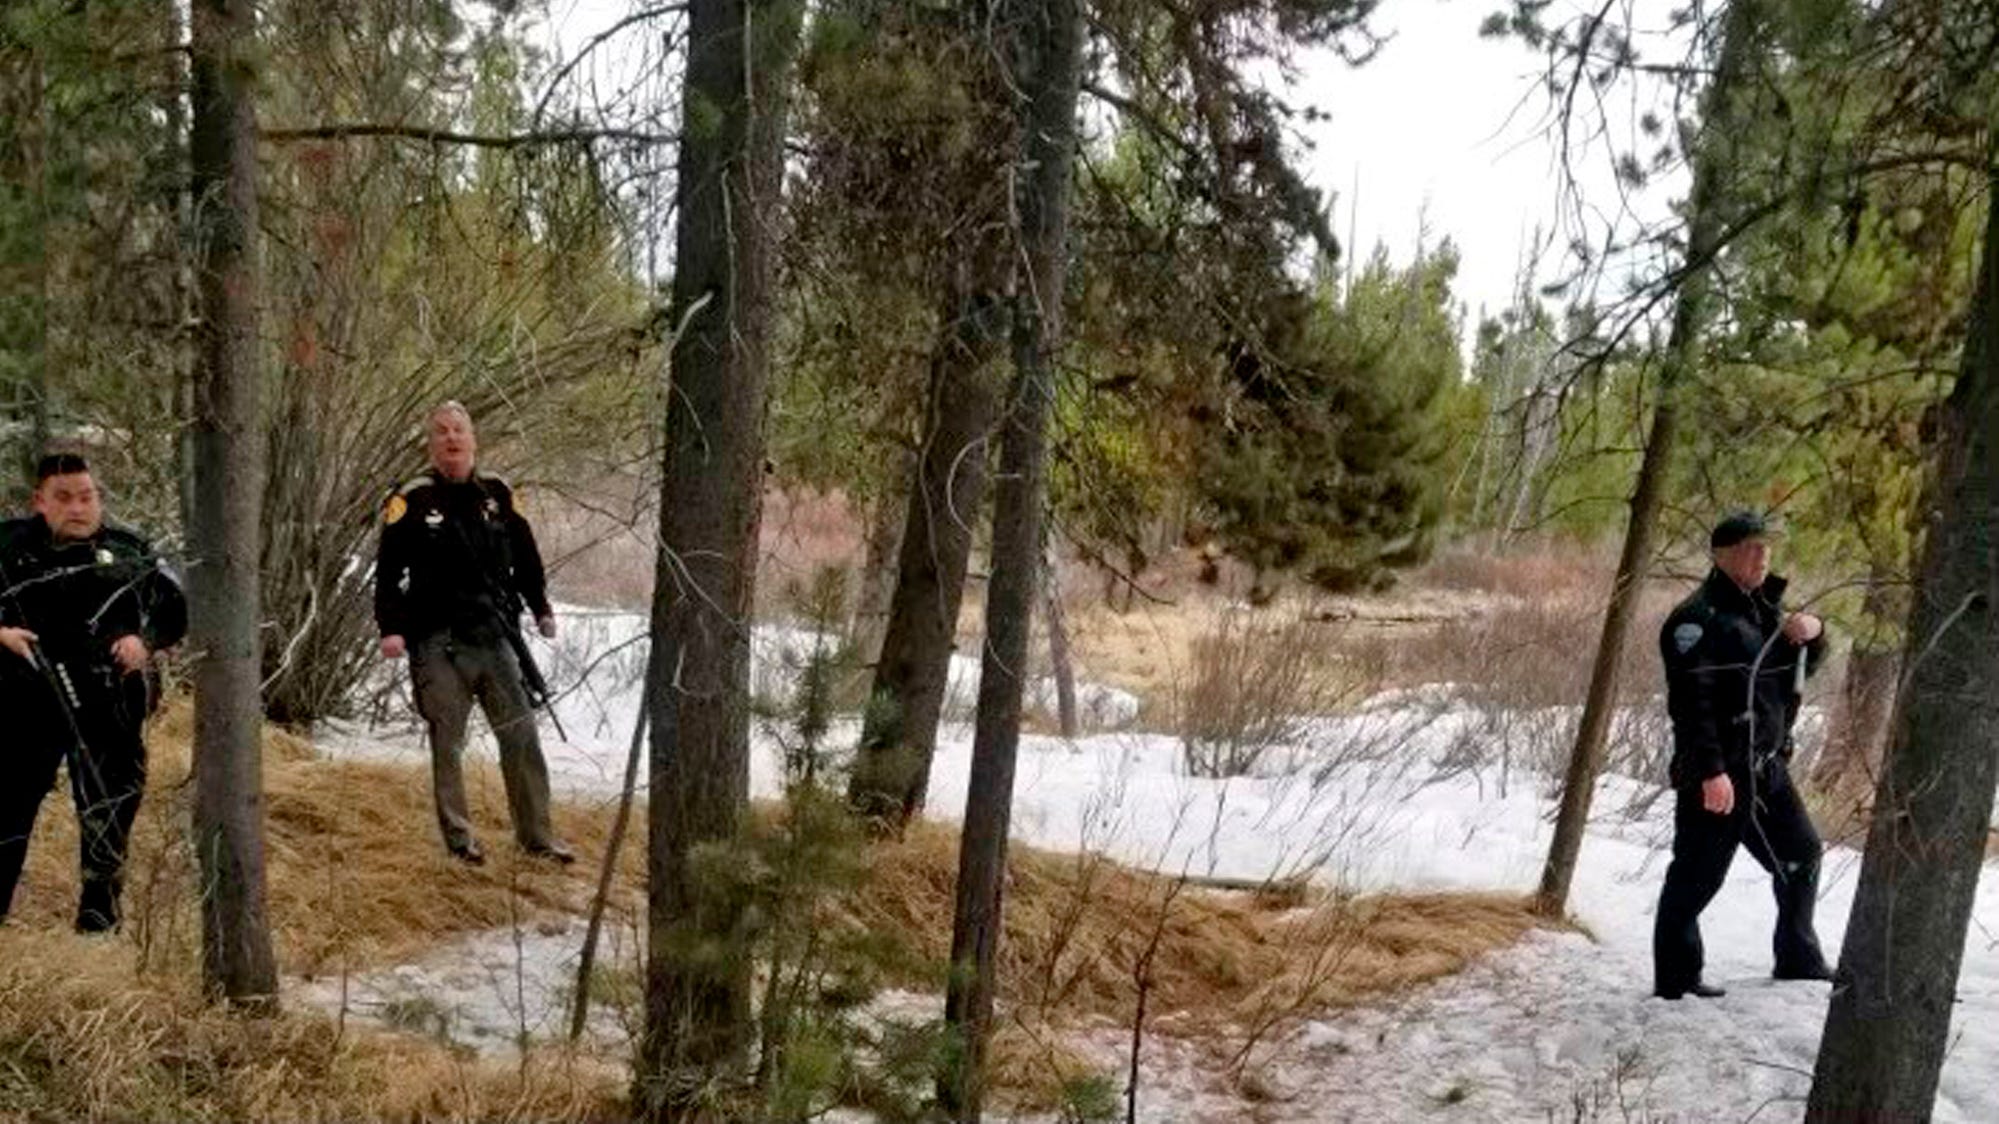 Bear in deadly attack near Yellowstone may have been guarding food